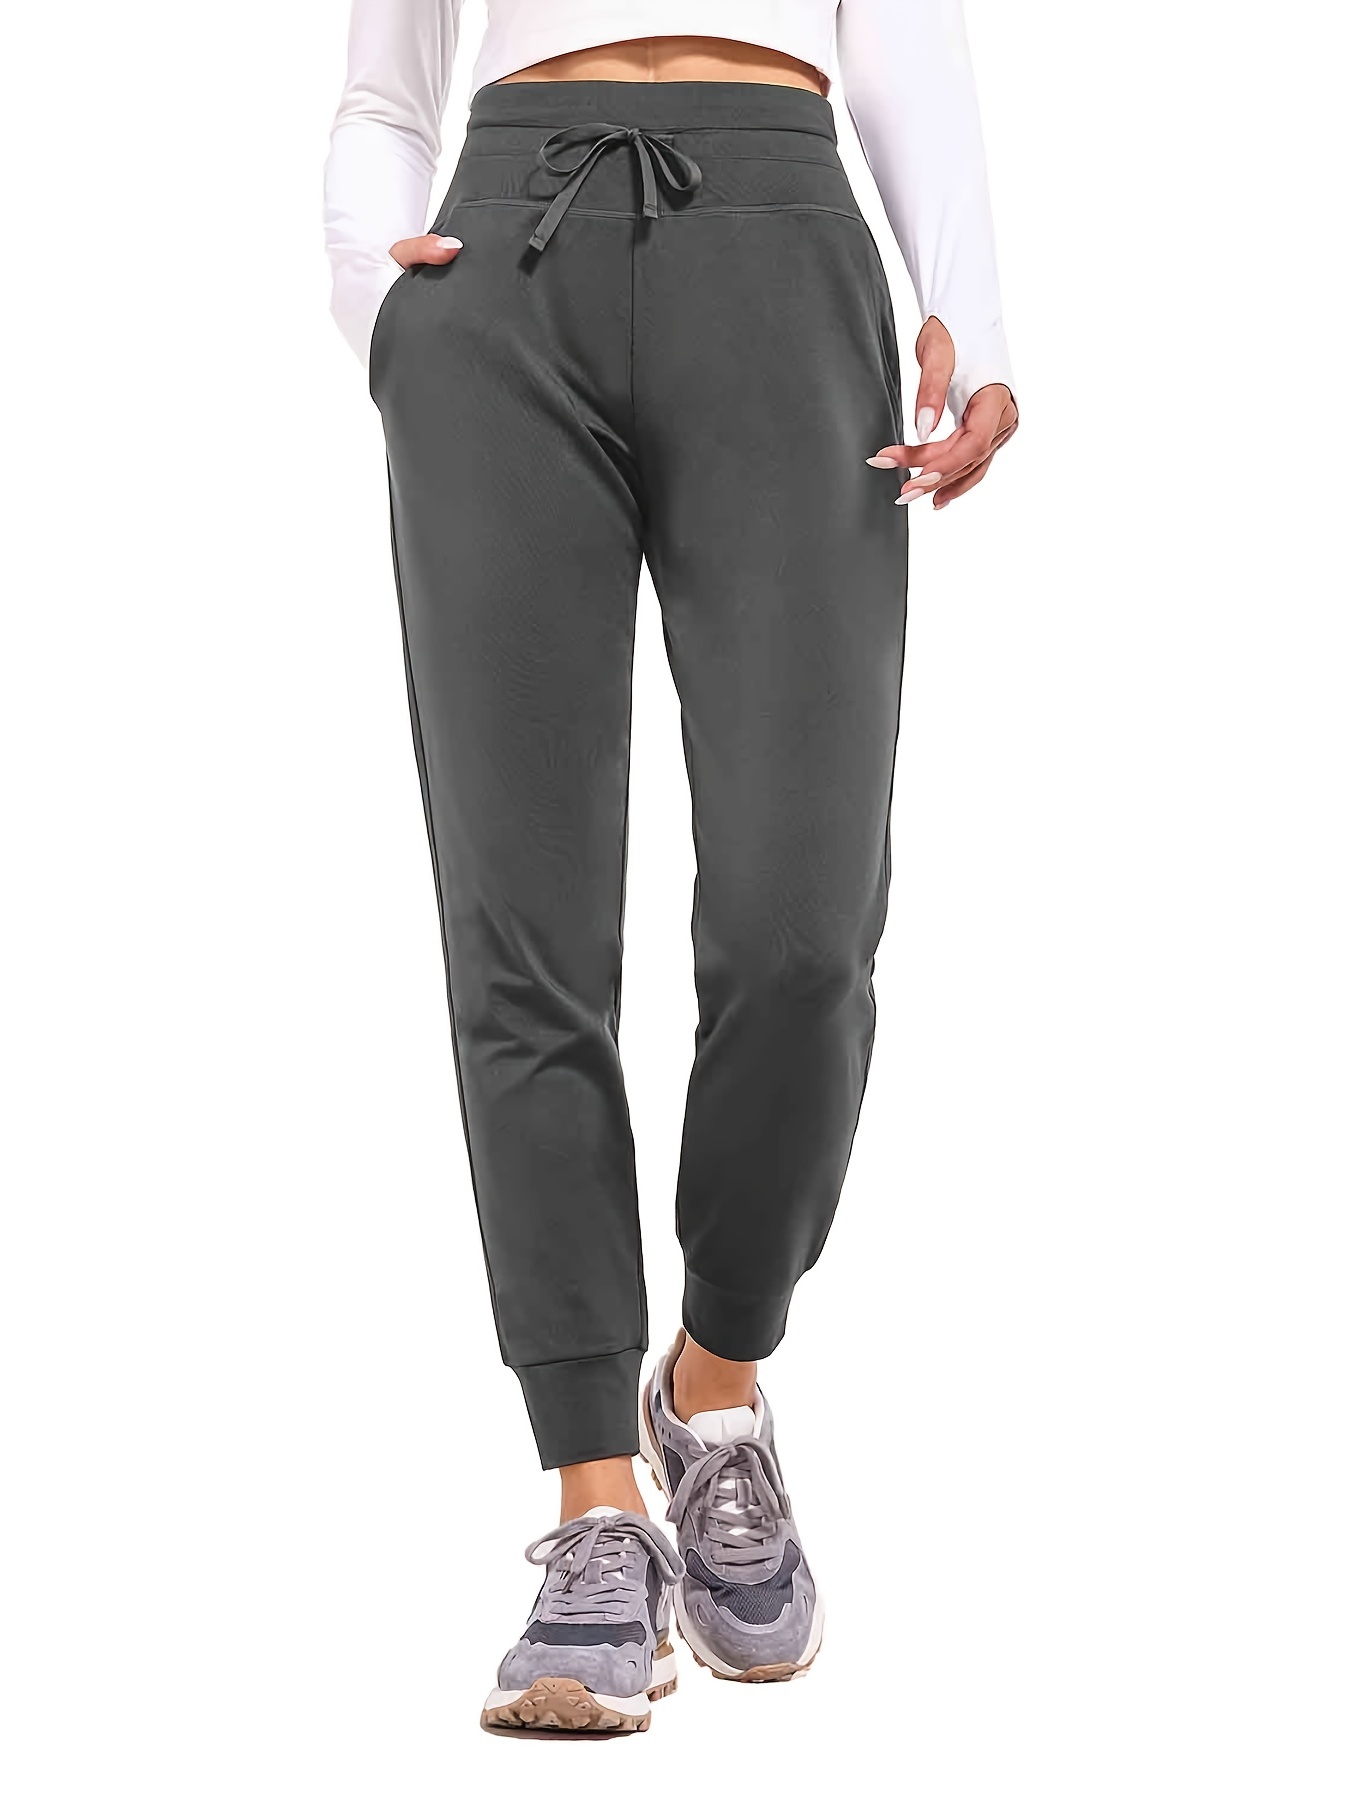 Women's Fleece Lined Pants Water Resistant Sweatpants High Waisted Thermal  Joggers Winter Running Hiking Pocketsgrey X-large